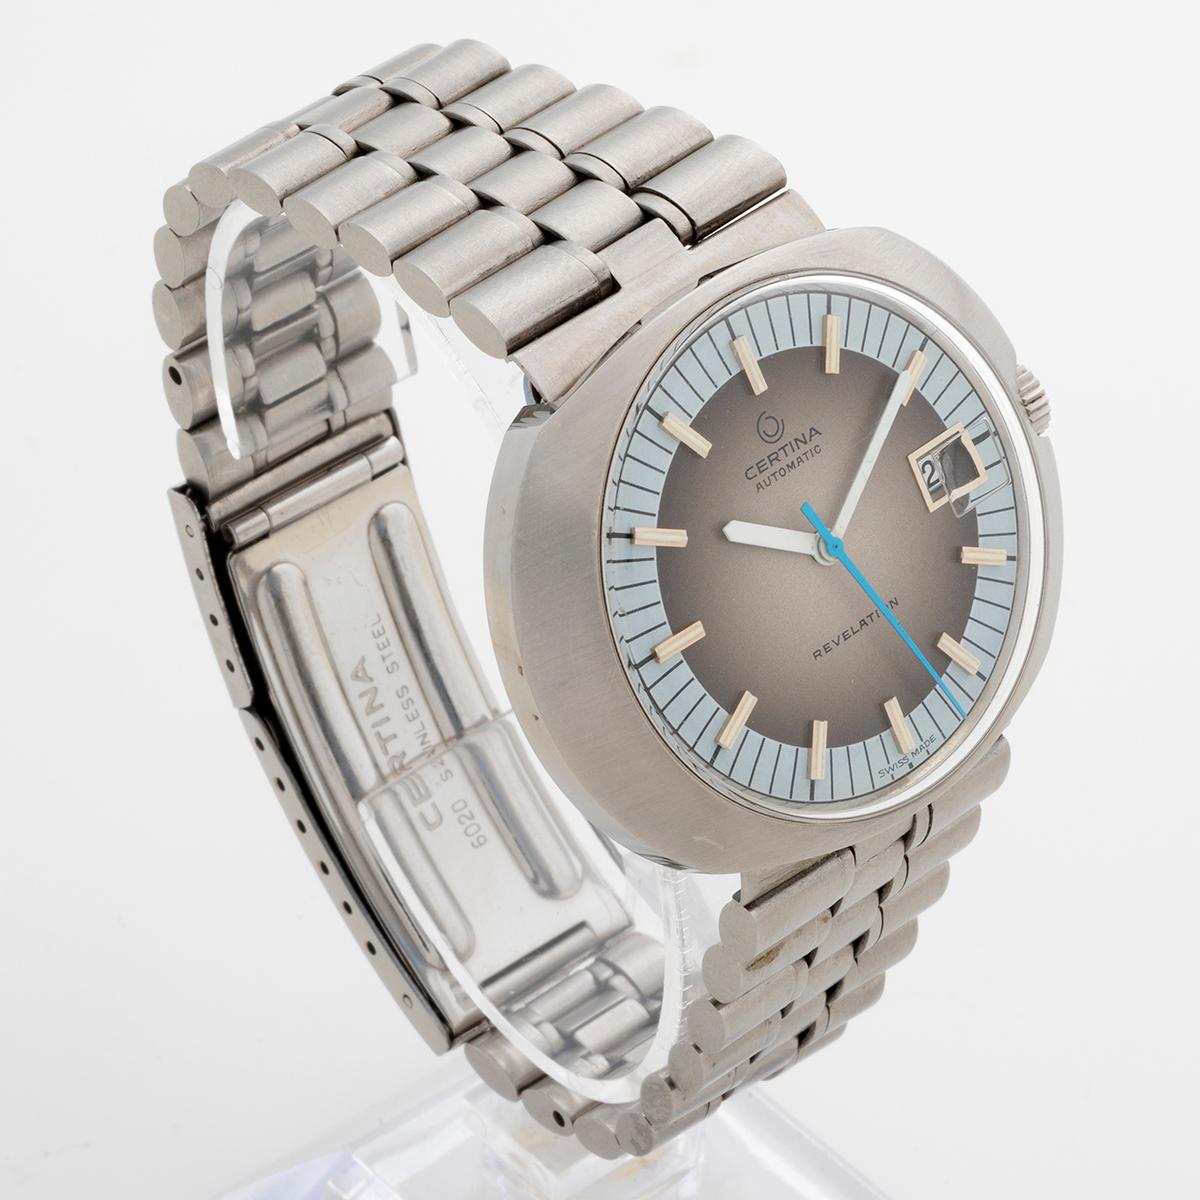 Our vintage Certina Revelation features a flying saucer 36 x 42mm stainless case with degrade grey dial and unusually, its original stainless steel bracelet and turquoise seconds hand. Wonderful and retro, this example of reference 5801 is presented